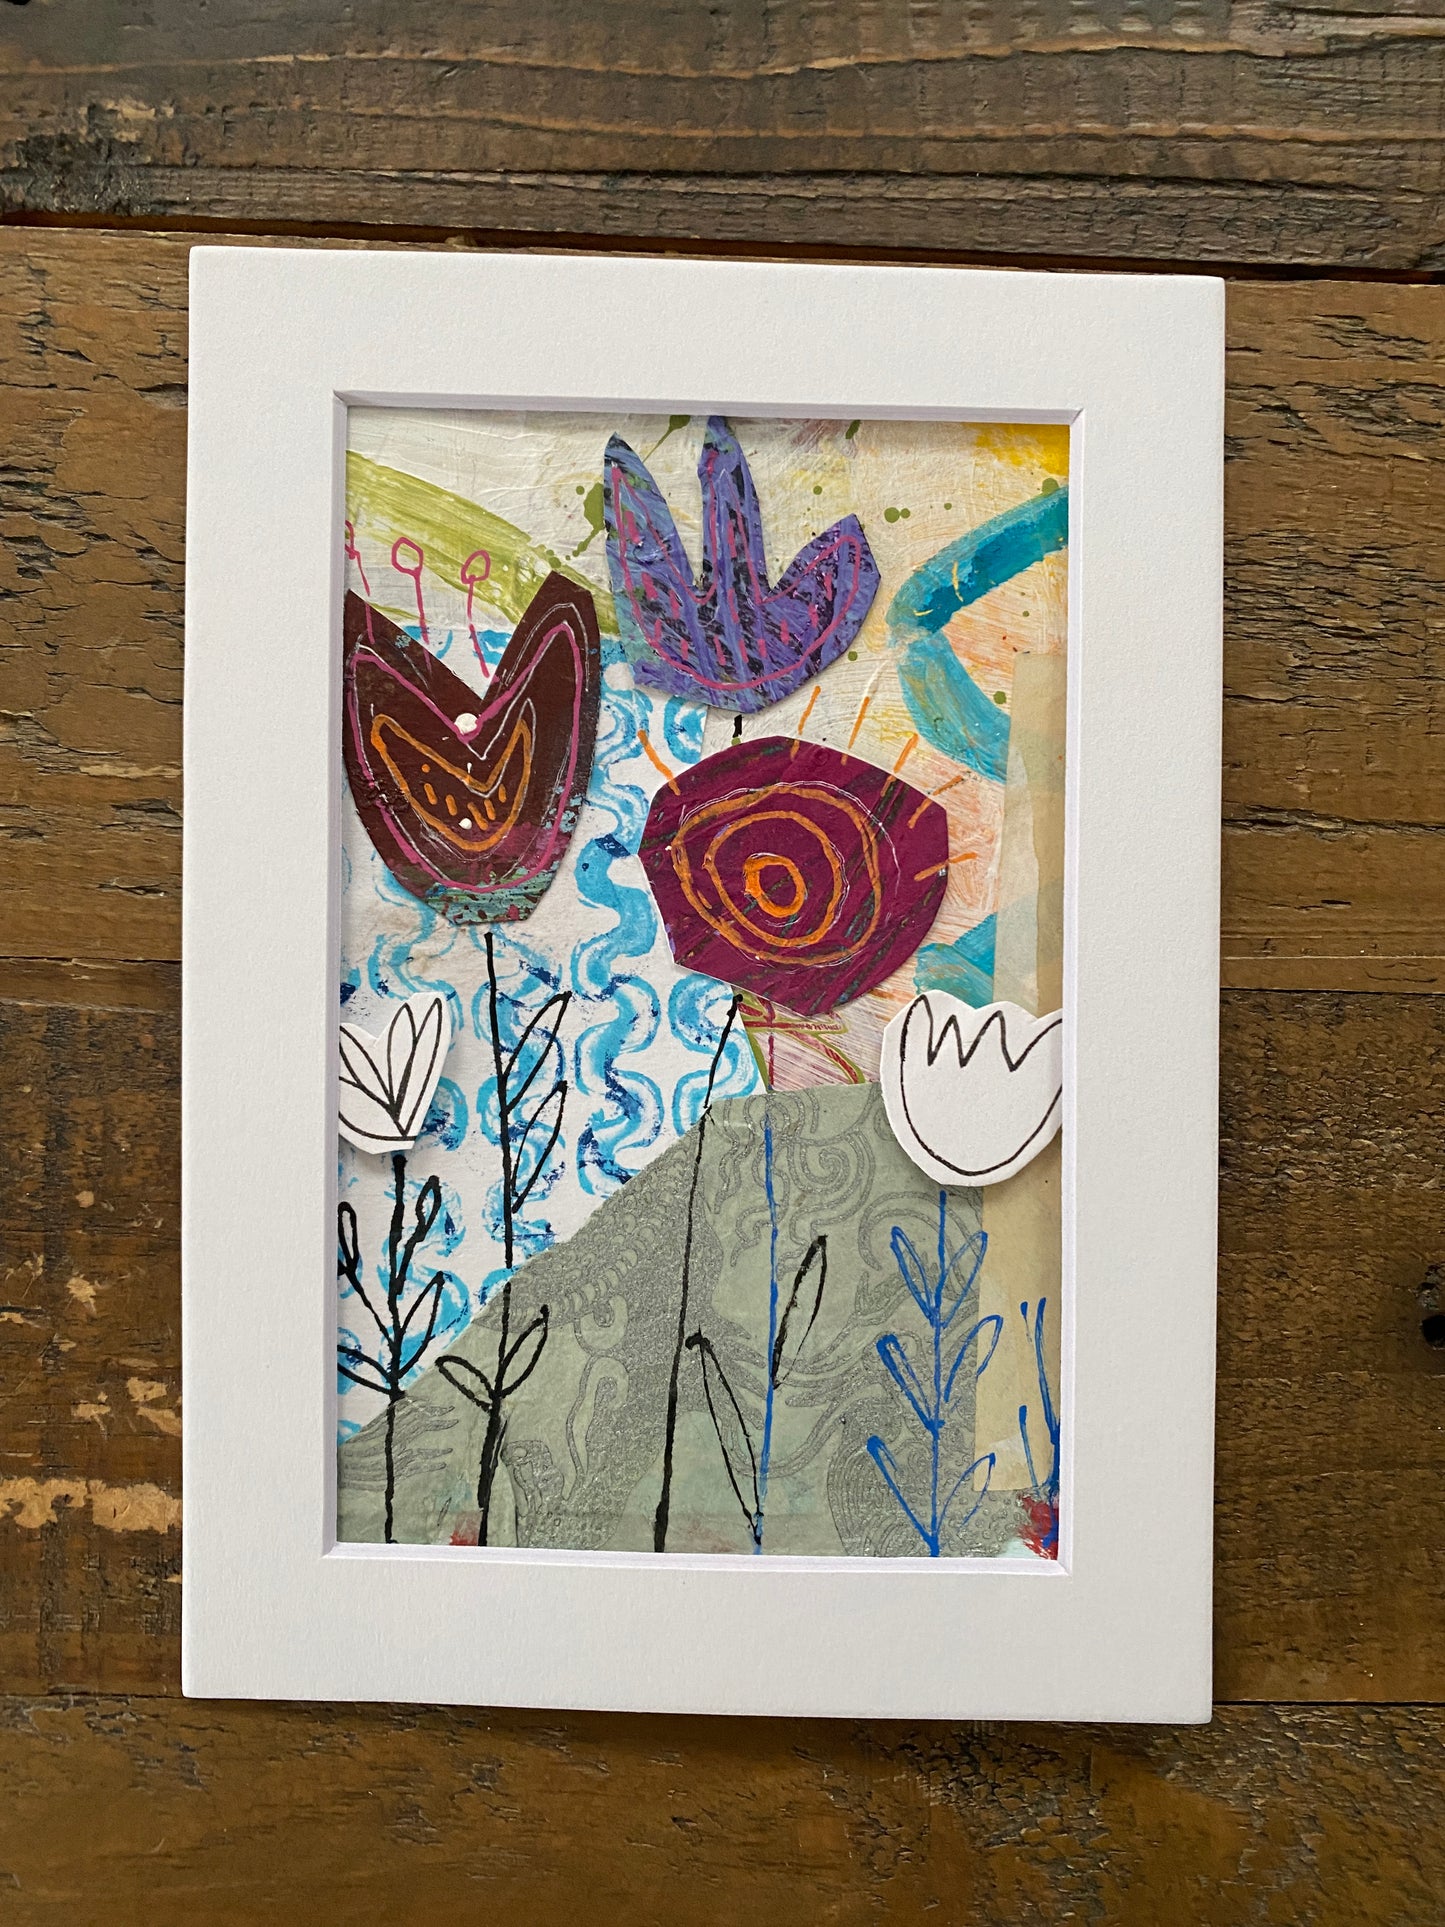 Wild Flower Patch / Original Mixed Media Collae on Paper / Mulicoloured flowers / 5"x7" Matted